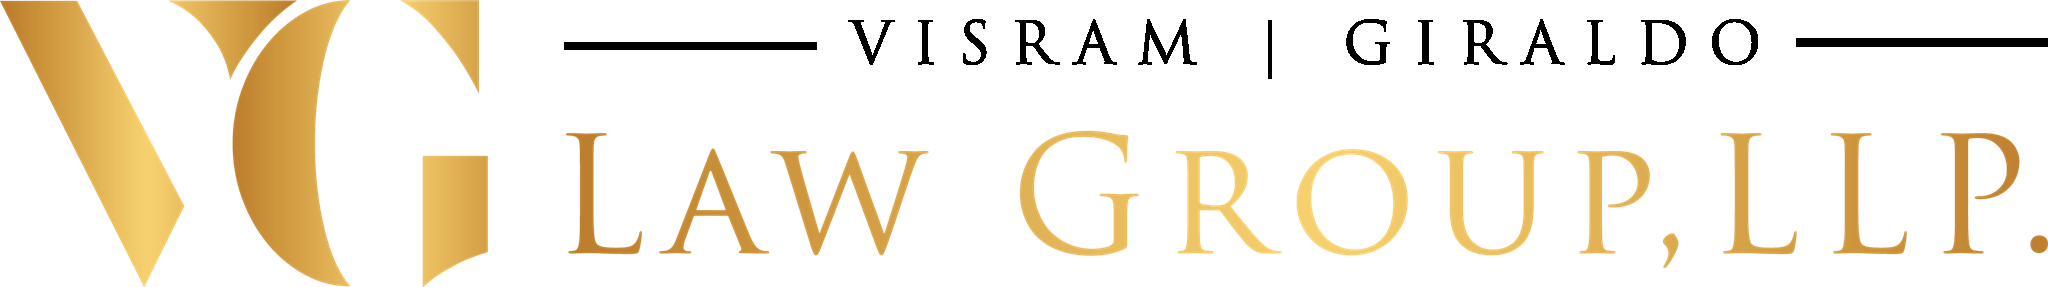 COVID-19 Insurance Attorney | VG Law Group, LLP.